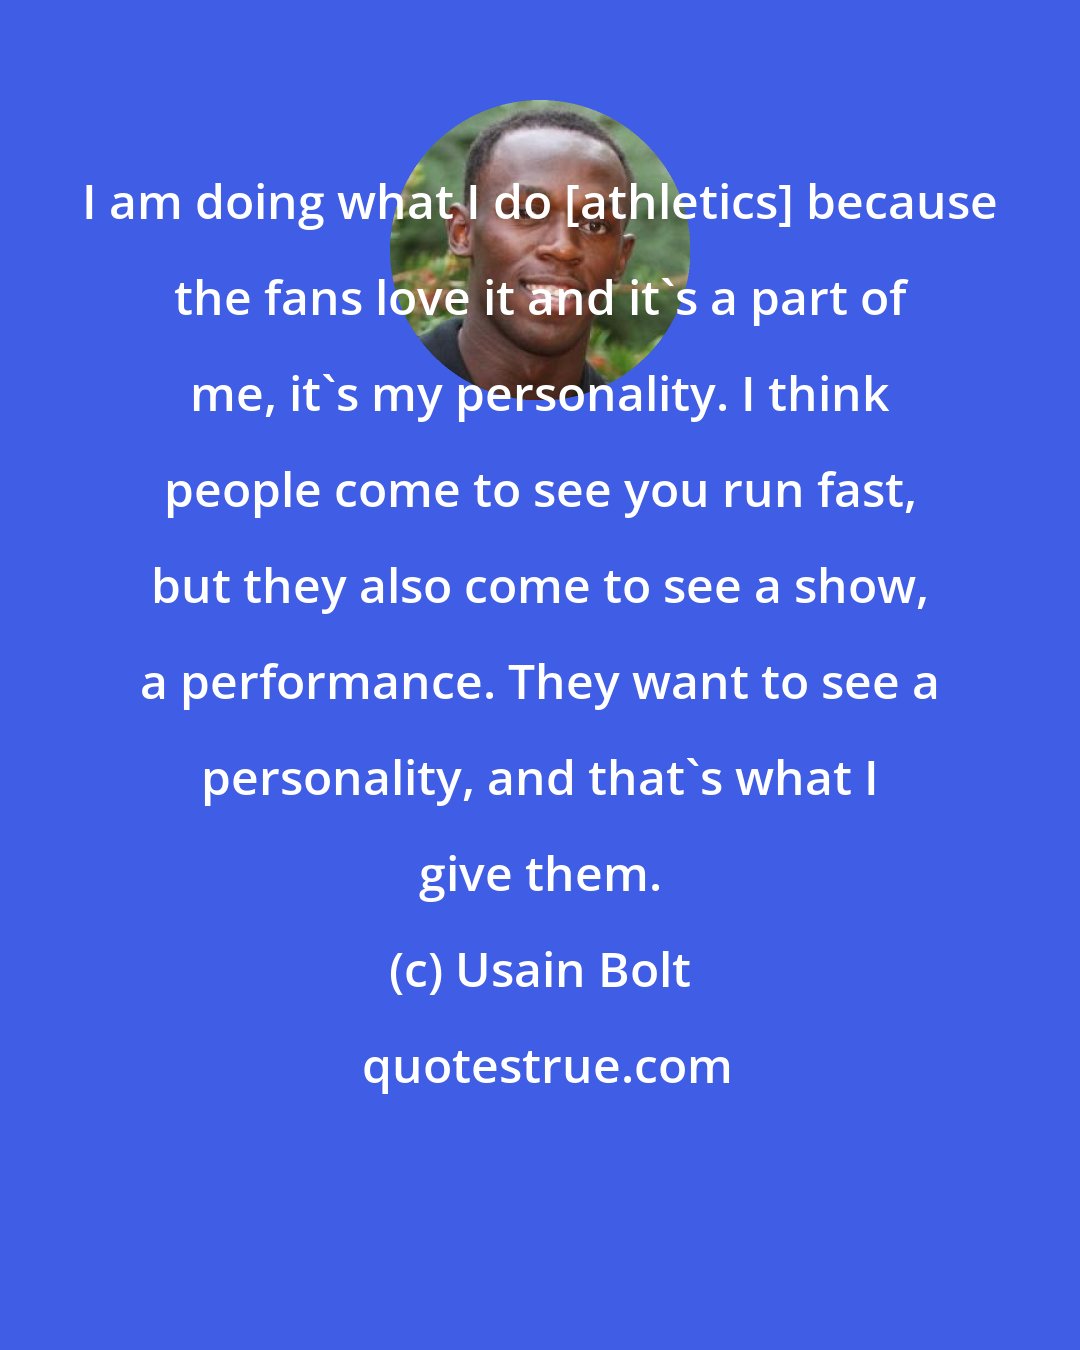 Usain Bolt: I am doing what I do [athletics] because the fans love it and it's a part of me, it's my personality. I think people come to see you run fast, but they also come to see a show, a performance. They want to see a personality, and that's what I give them.